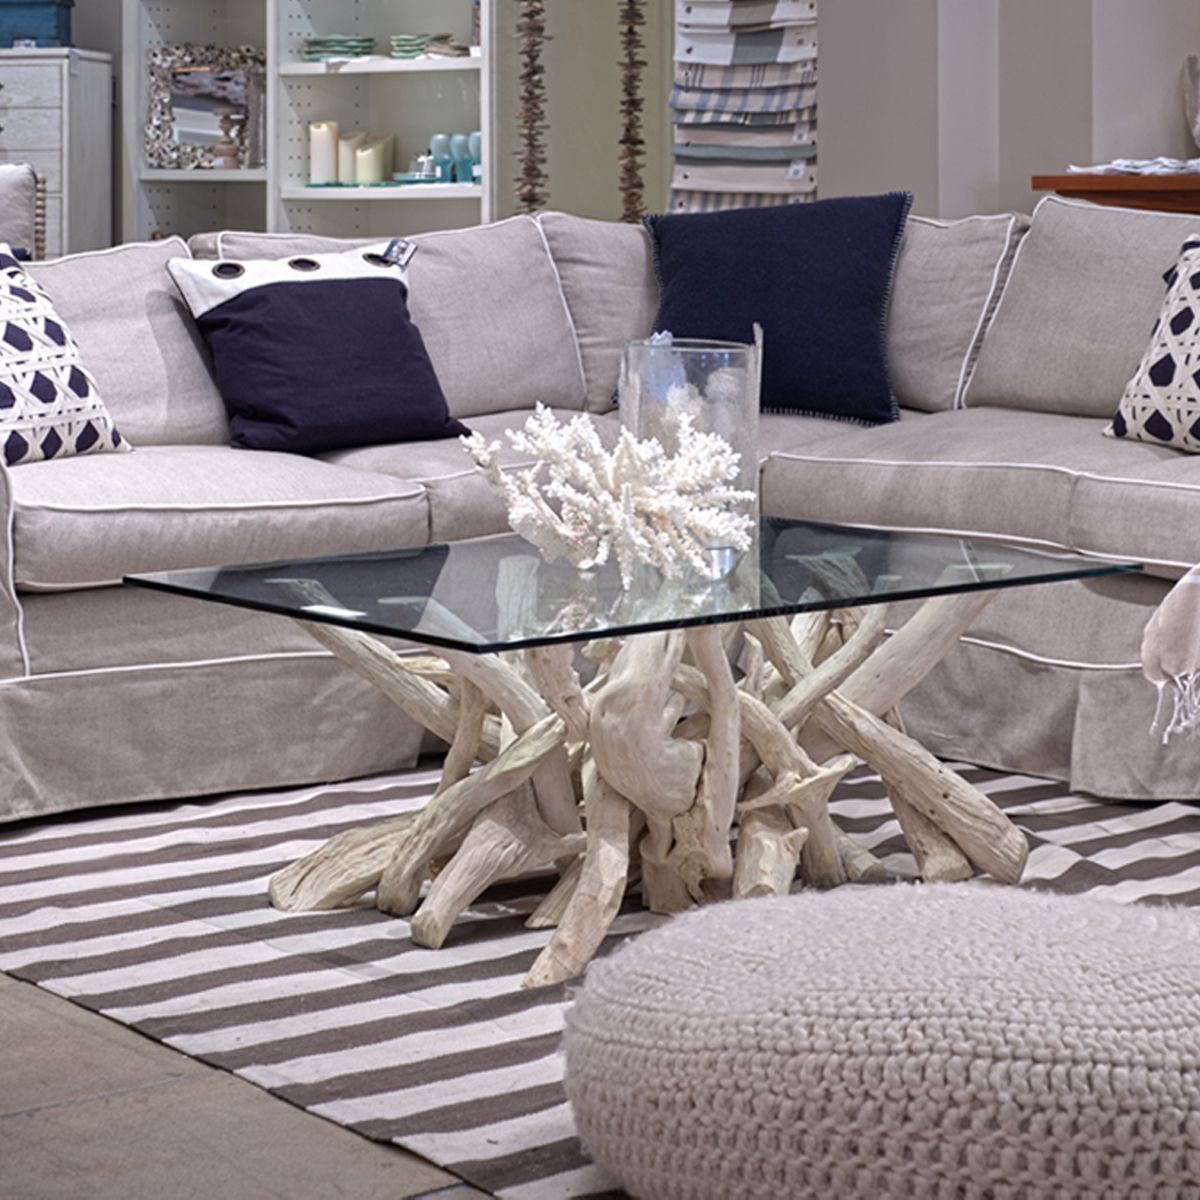 Glass Coffee Tables For Small Spaces Furniture Small Spaces Living Room Design With Square Glass Top Crate And Barrel Driftwood Coffee (Photo 4 of 10)